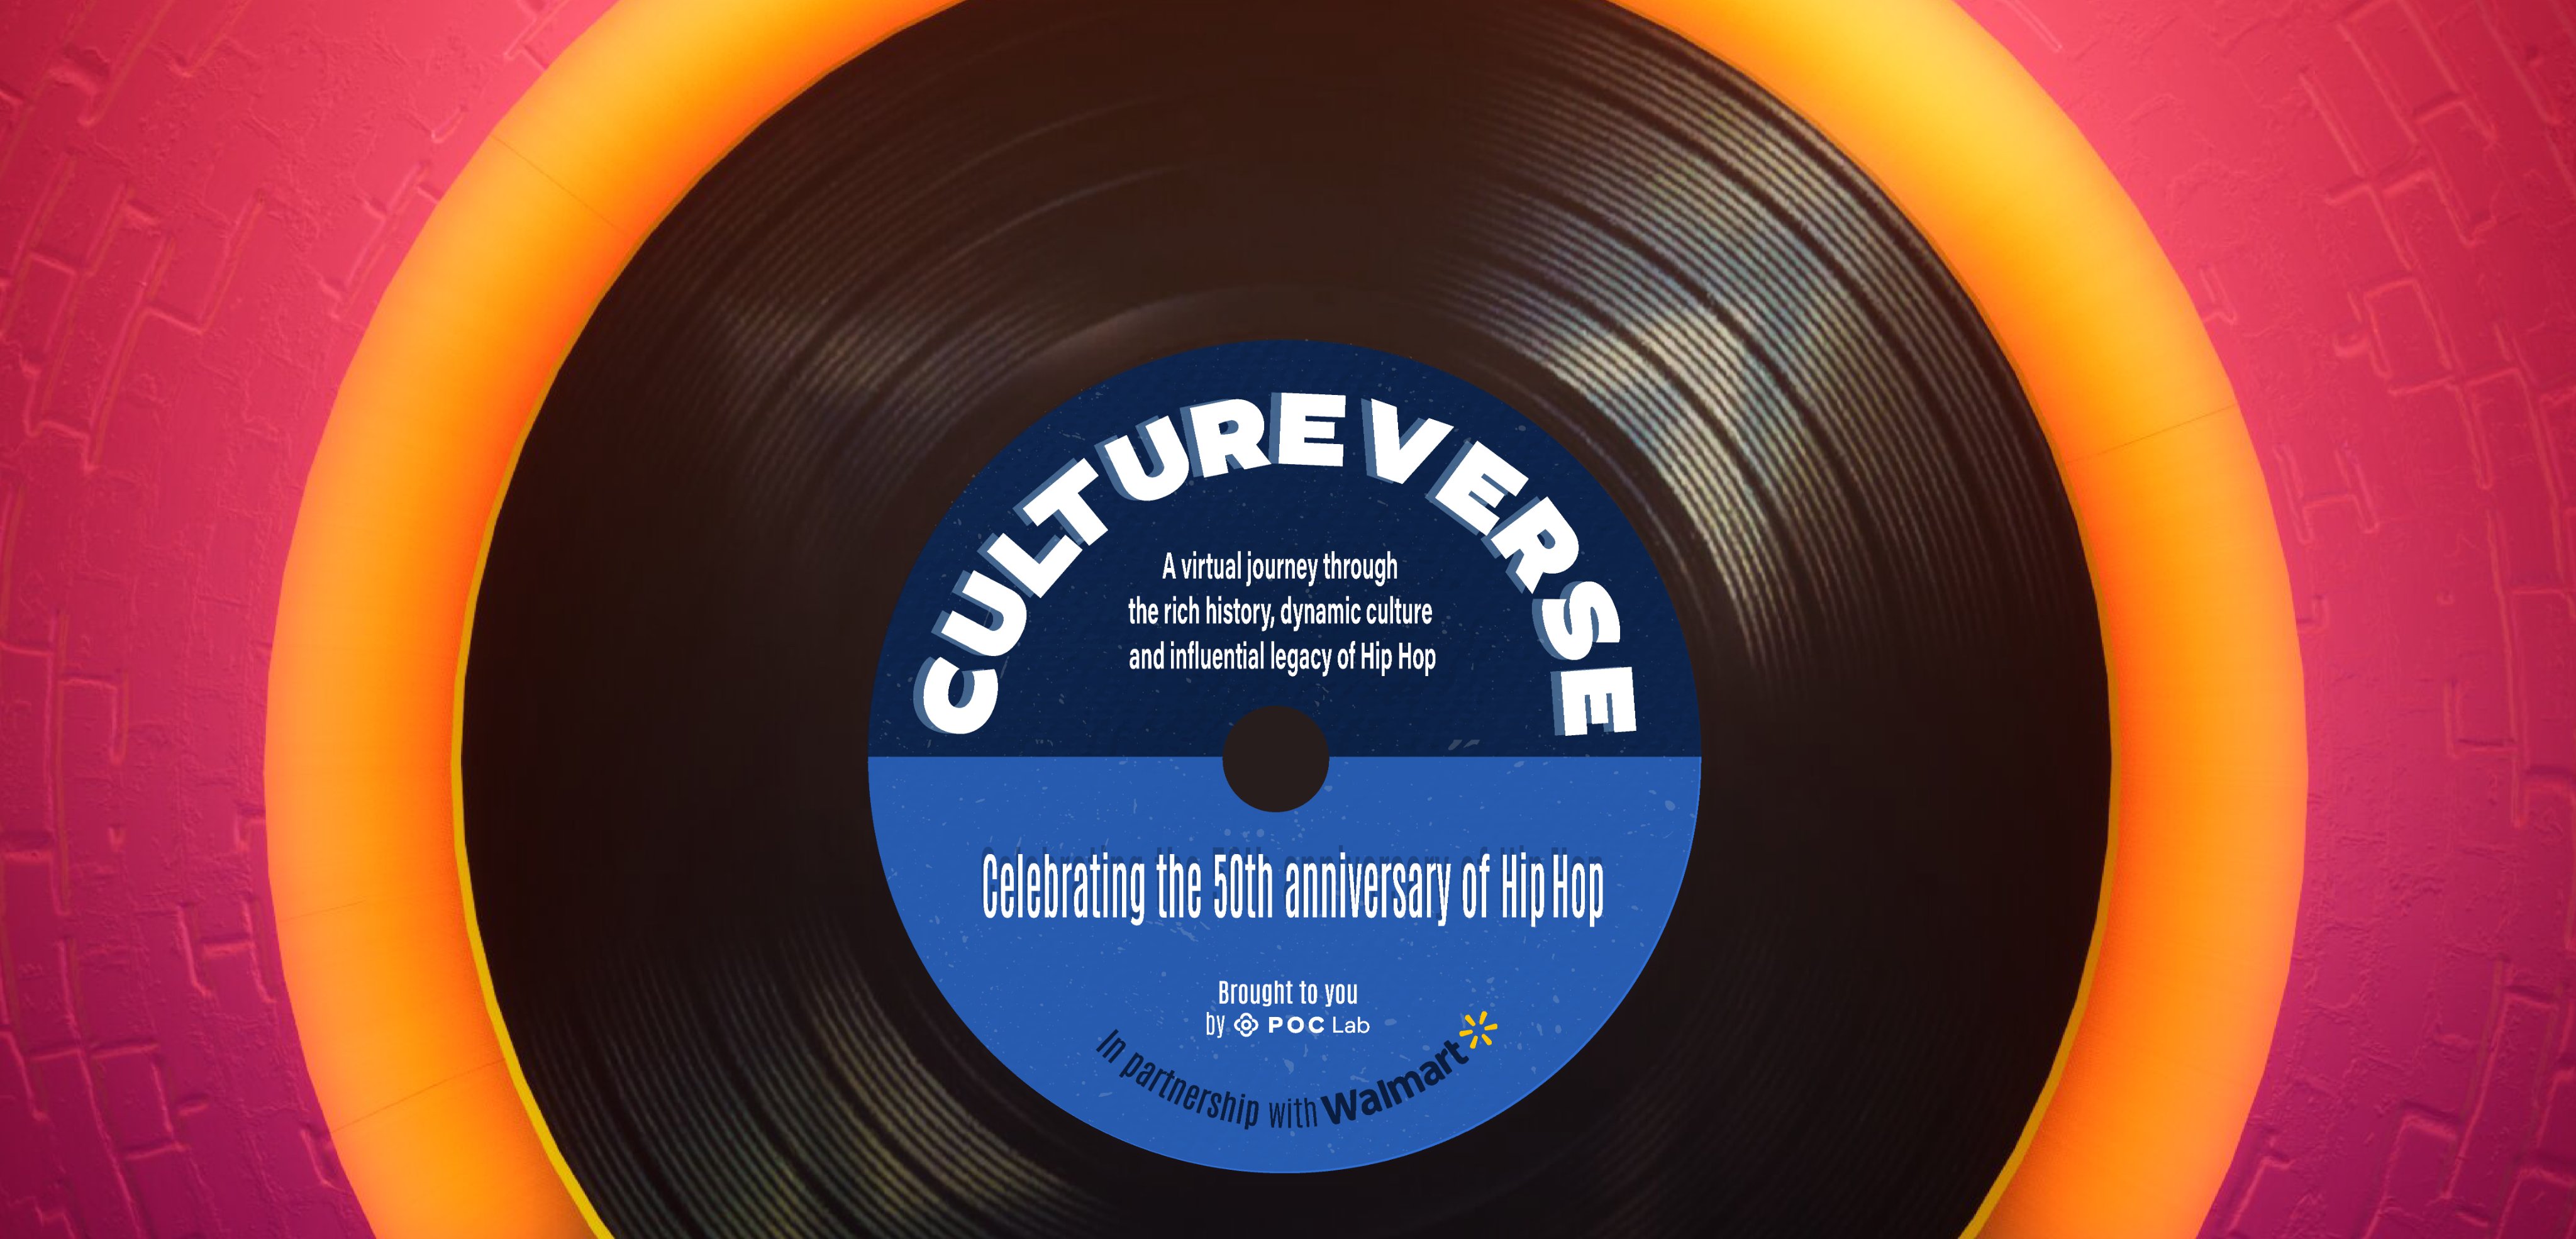 announcement poster for POC Labs Cultureverse